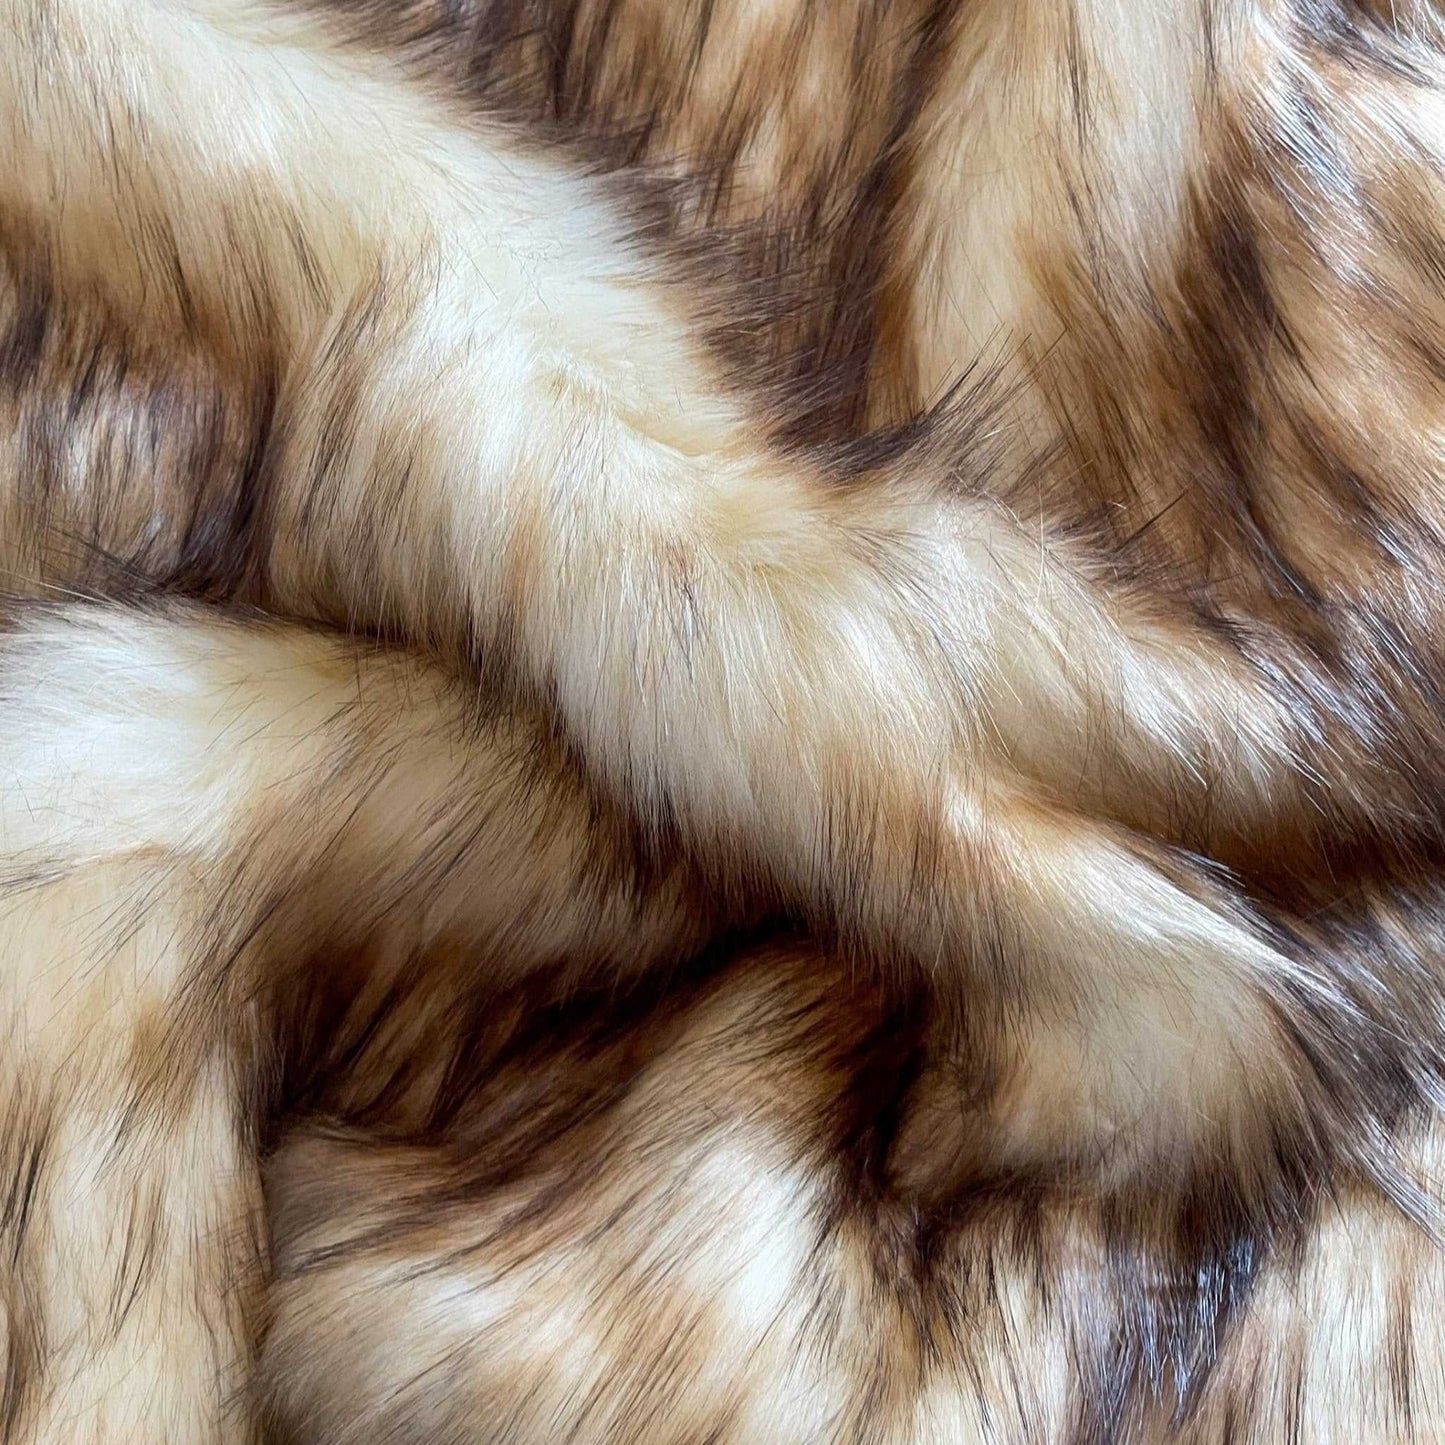 Creme Brulee Faux Fur Fabric by the Yard or Meter | Cream, Tan, Brown Pompom, Arts & Crafts, Decor, Costume Faux Fur Fabric 3 $ Buttons & Beans Co.